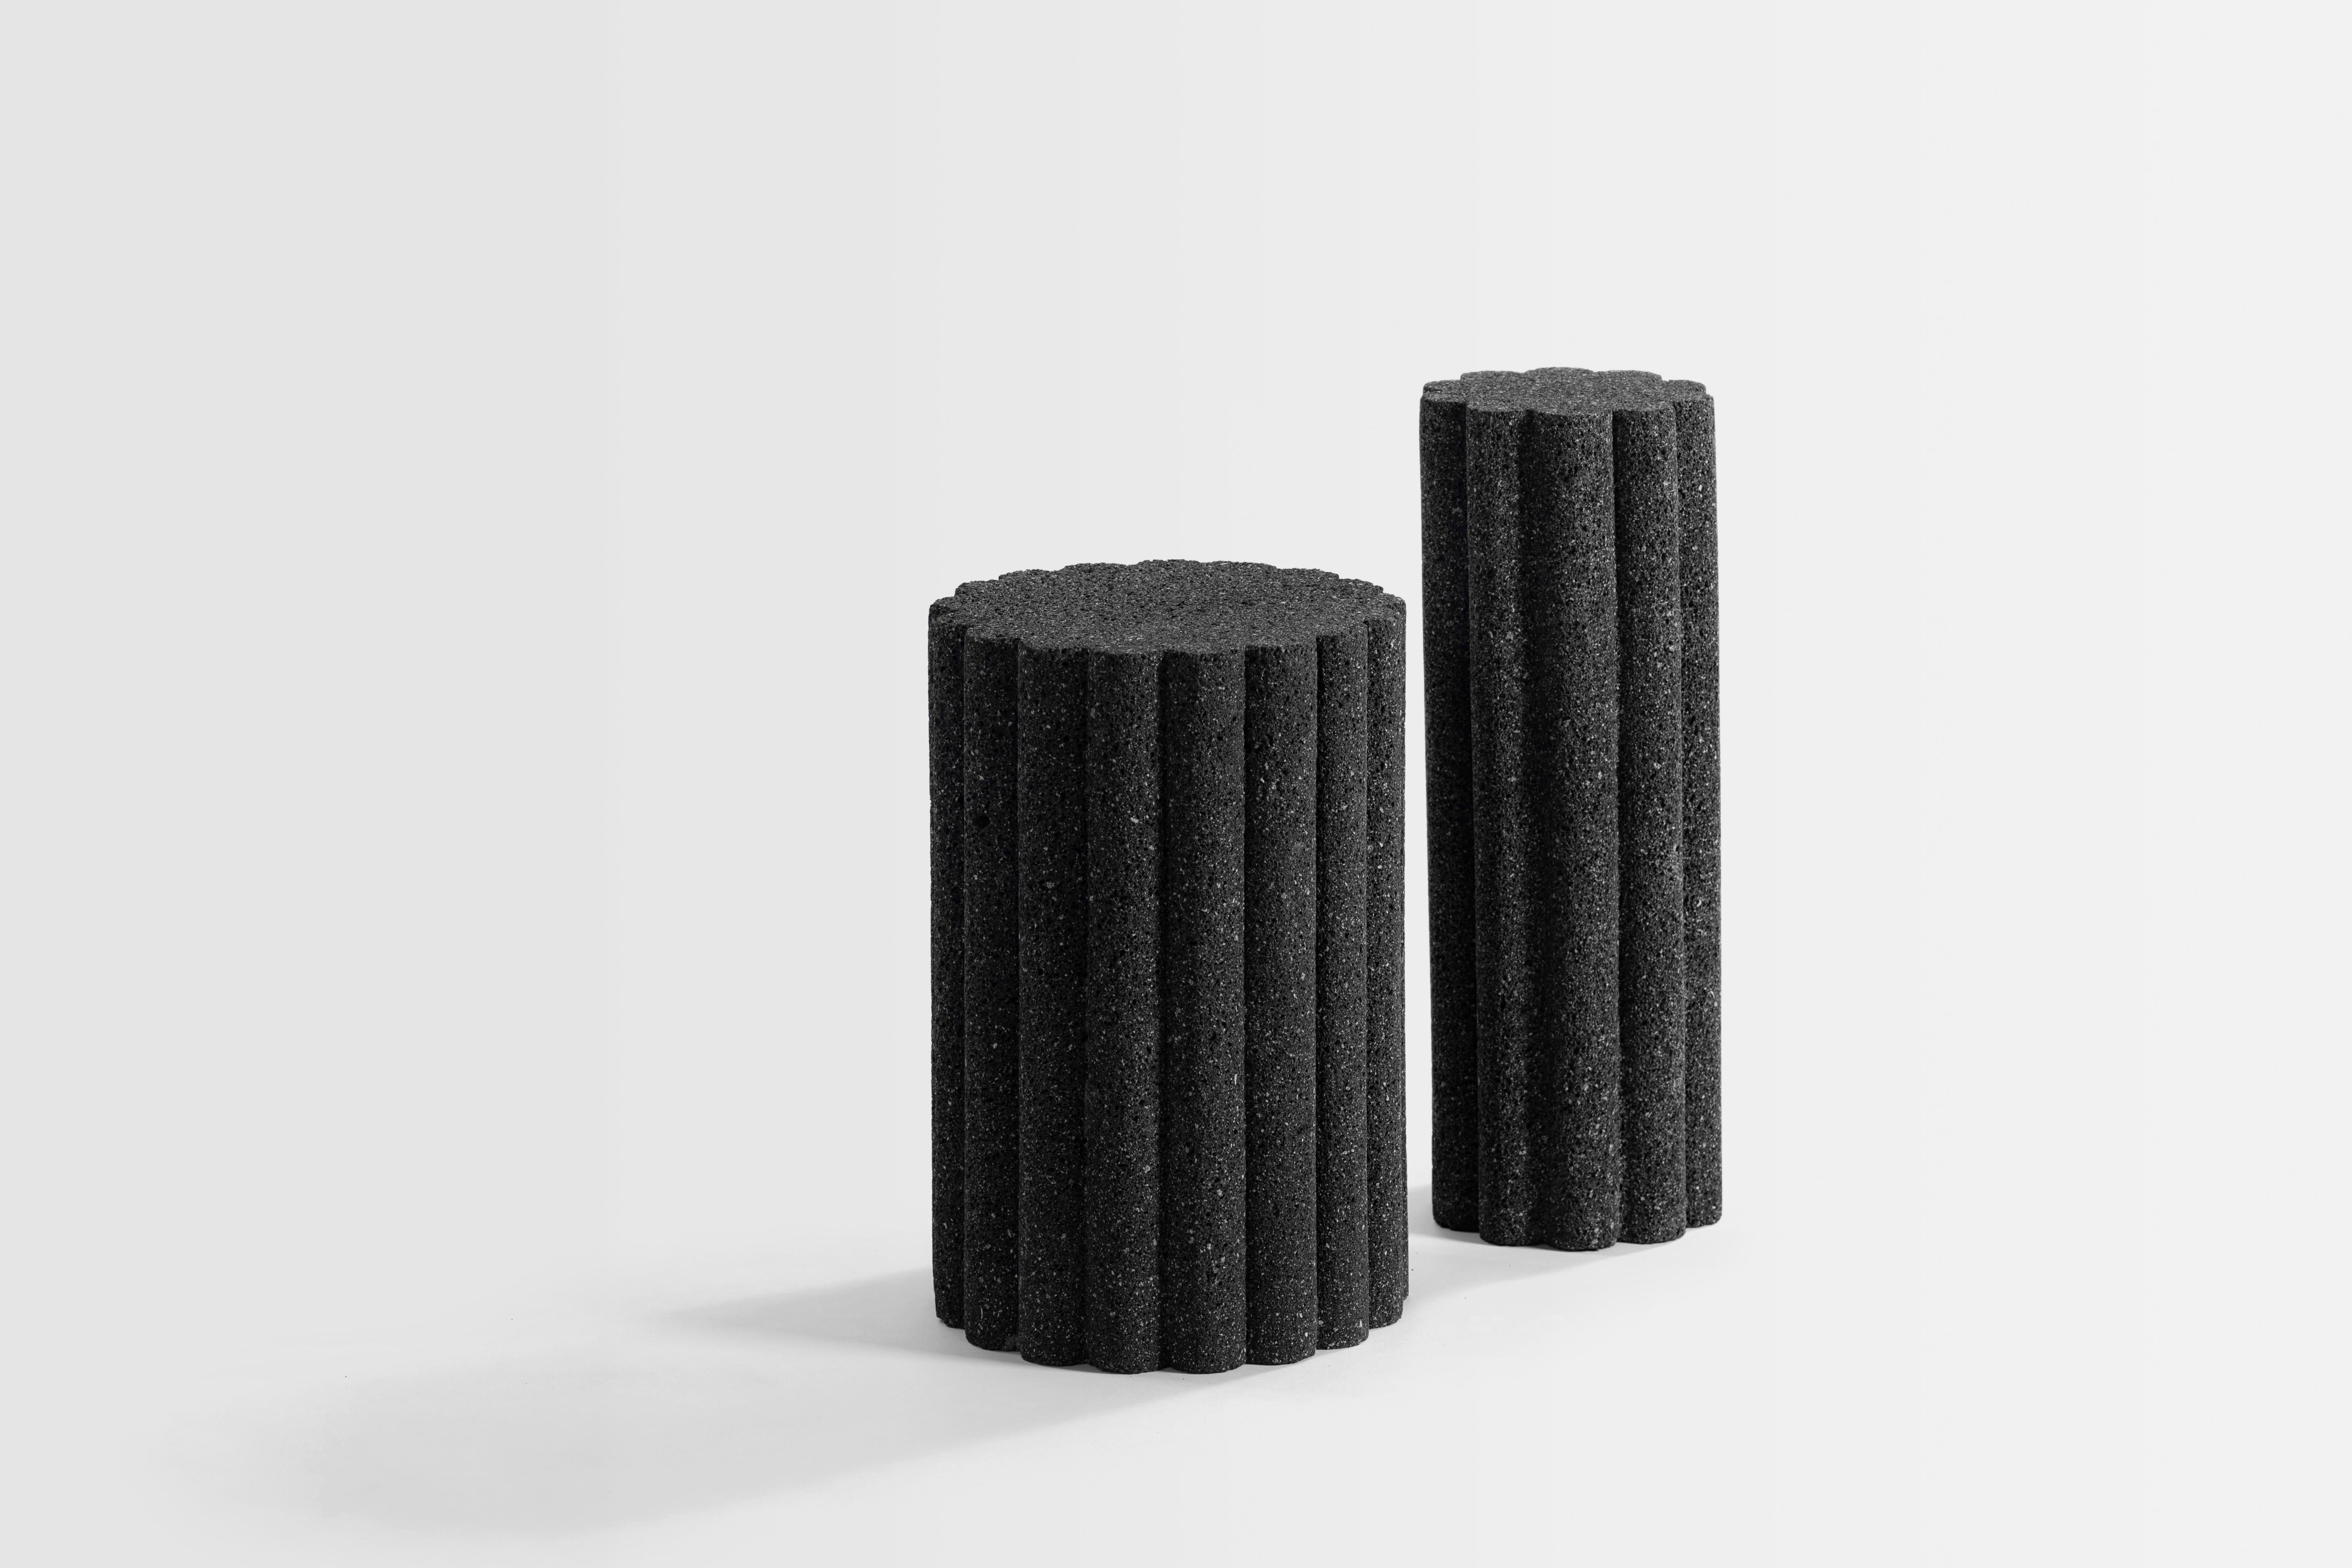 Loto Roca is exploration personified. These volcanic stone monoliths have been carved mastering a meditative process with chisel and hammer. It comes in two different width presentations and two different heights recalling esthetic character of the